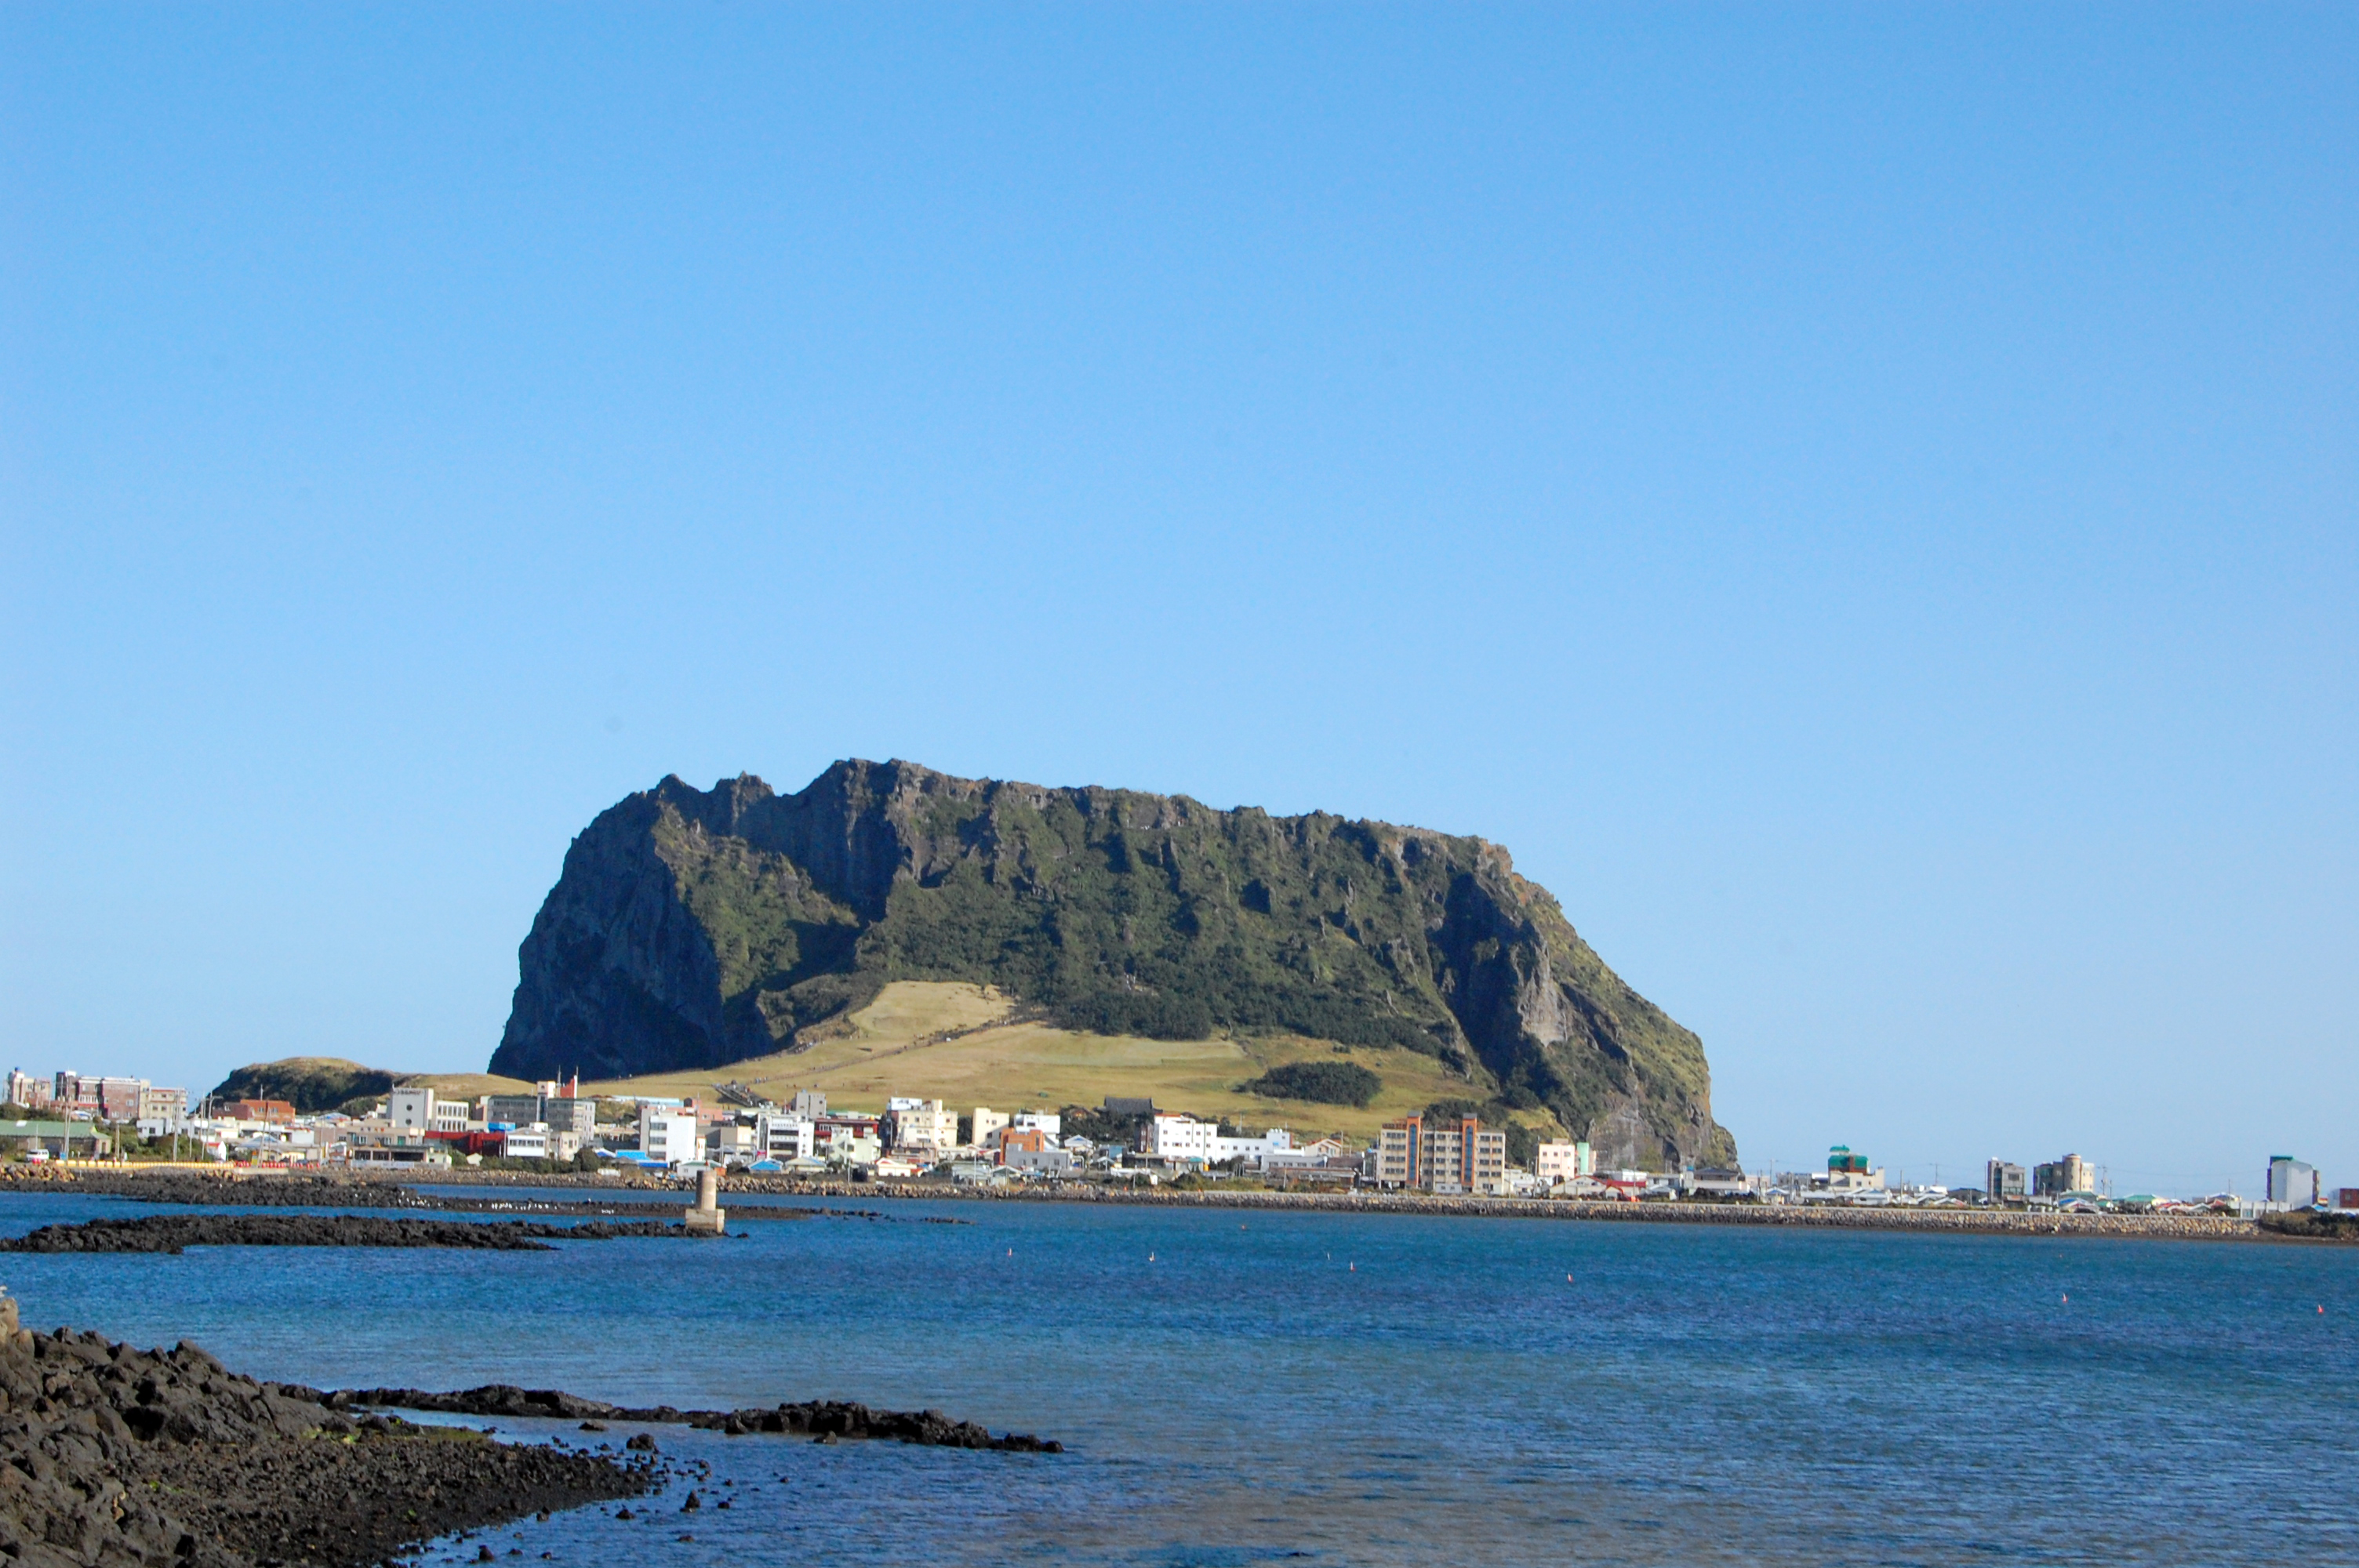 Jeju island has only 600,000 residents – which is roughly 3% of Seoul’s population on land that’s 3X the size of Seoul’s metropolitan area. 